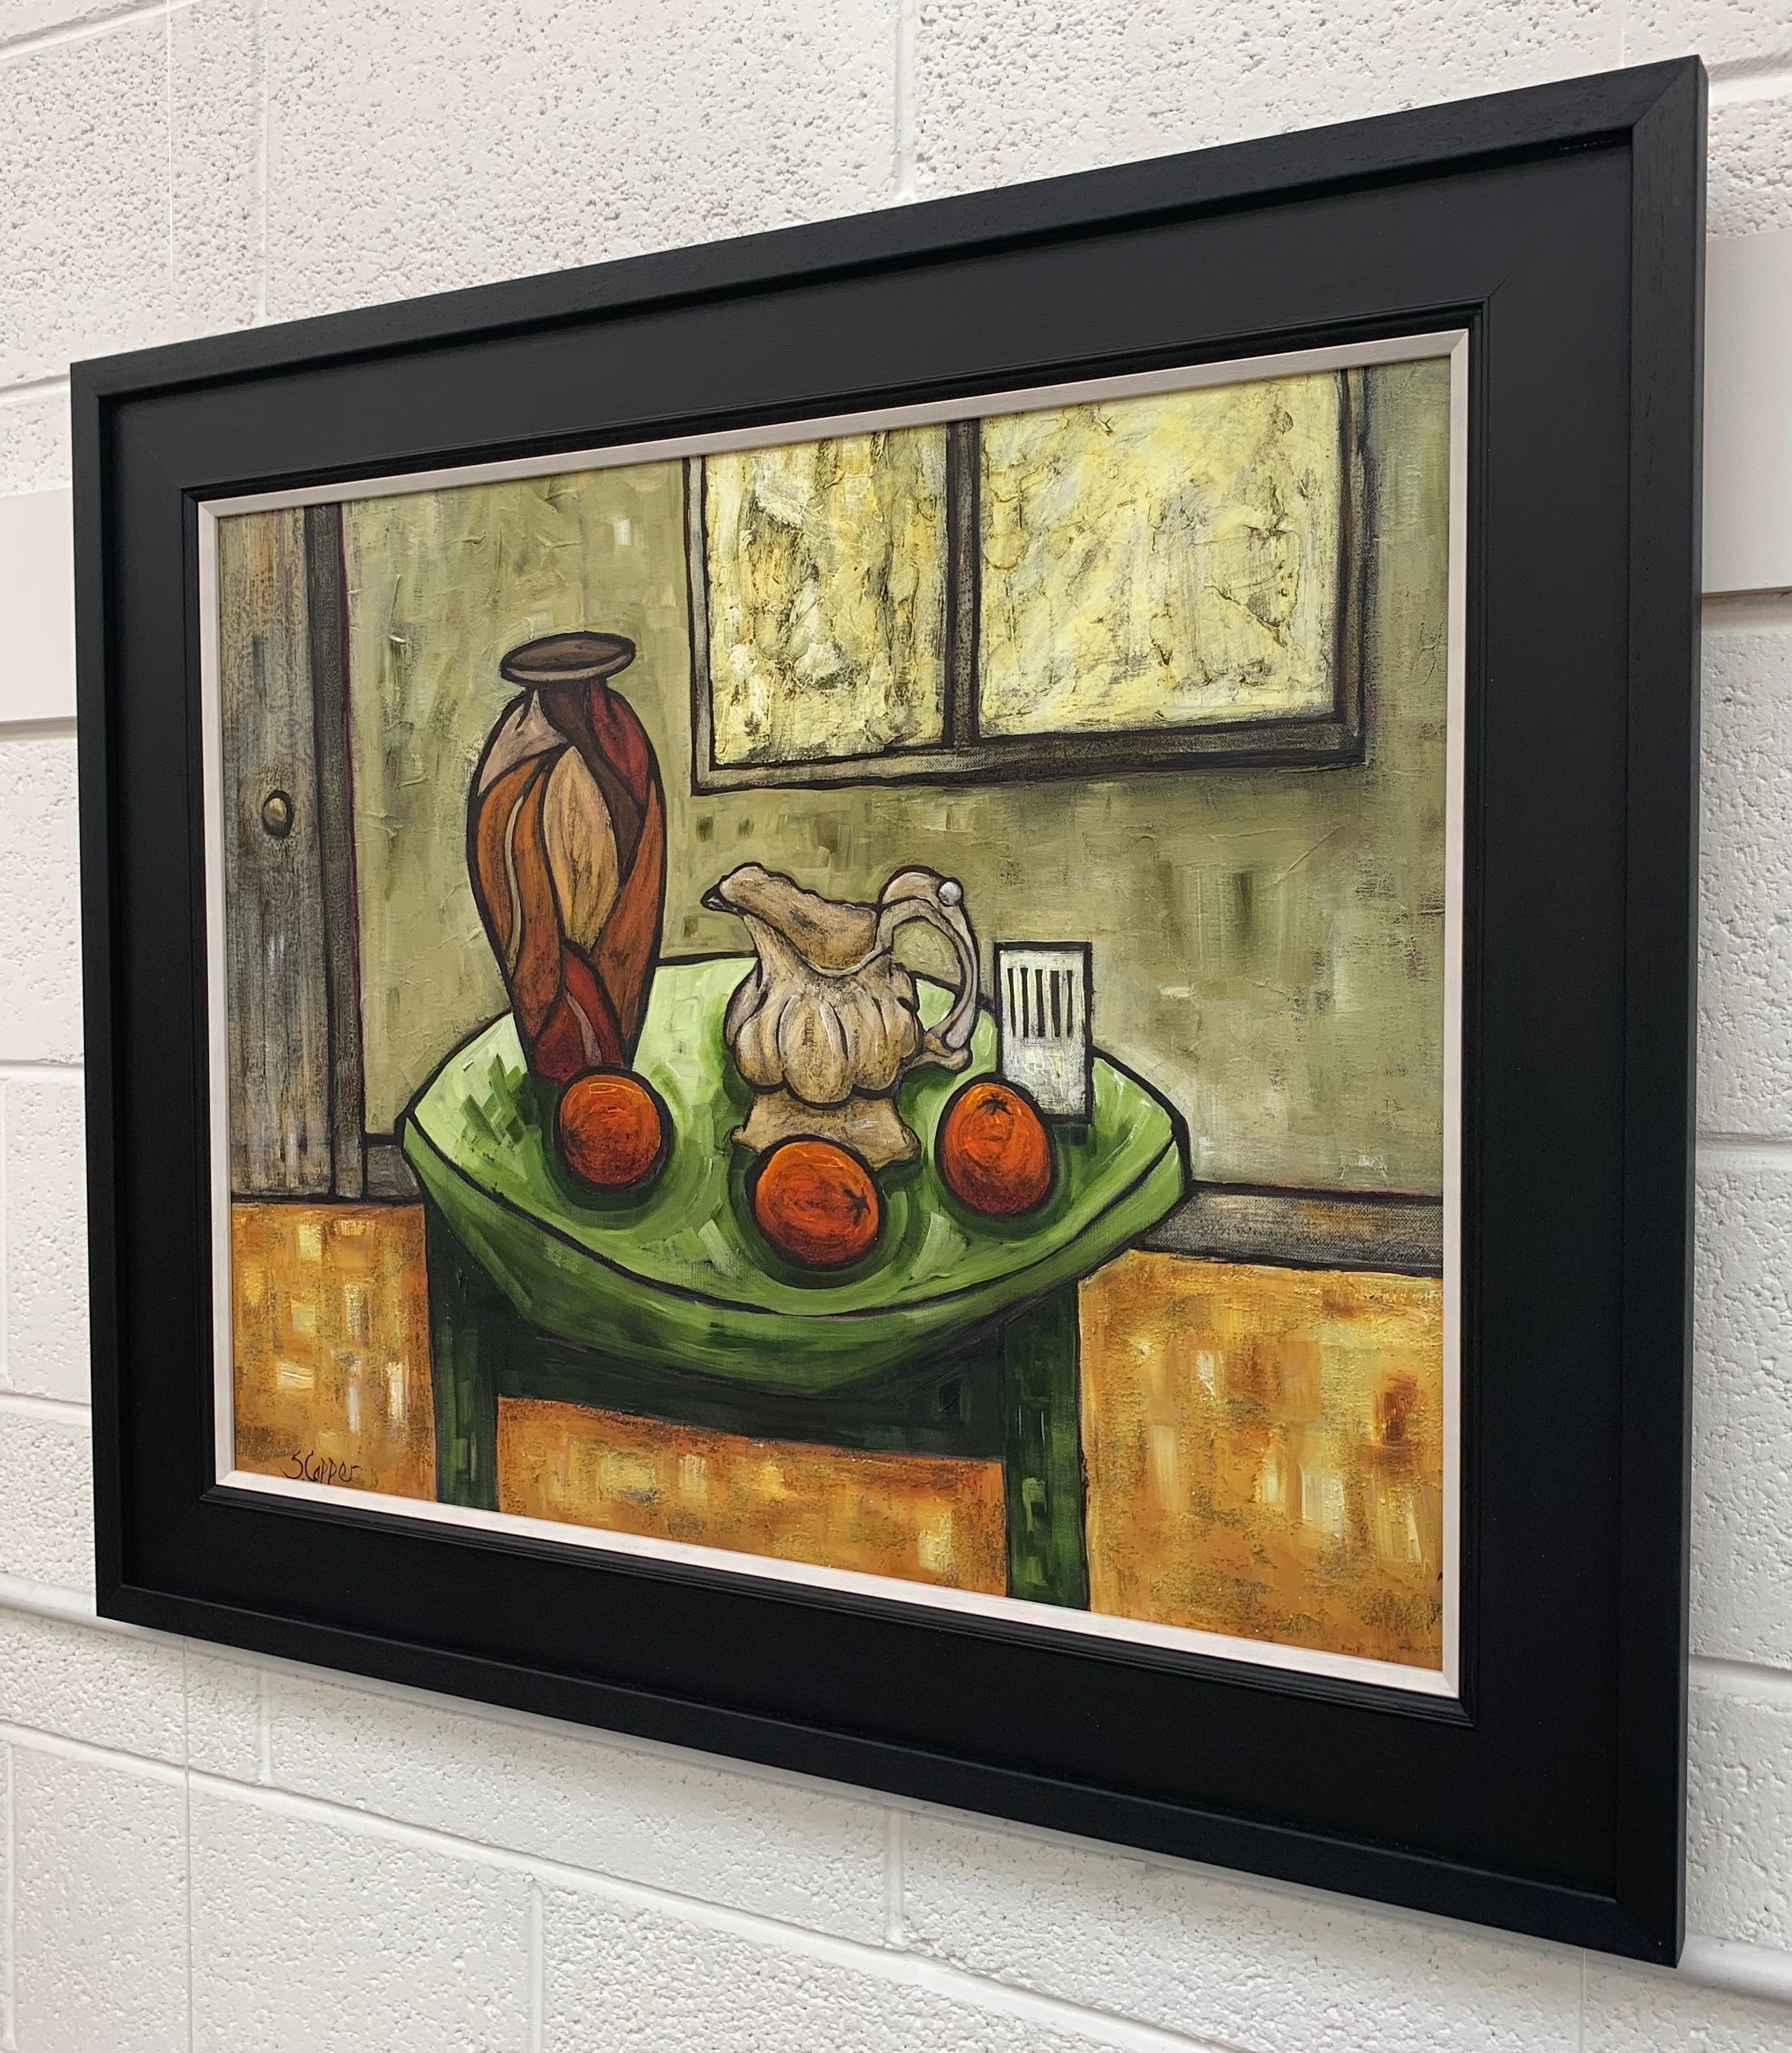 Cream Jug Still Life Painting by Cubist Fauvist British Expressionist Artist. 

Art measures 30 x 24 inches 
Frame measures 37 x 31 inches

Steve Capper, who trained at Manchester College of Art, is an artist who sits firmly in the tradition of